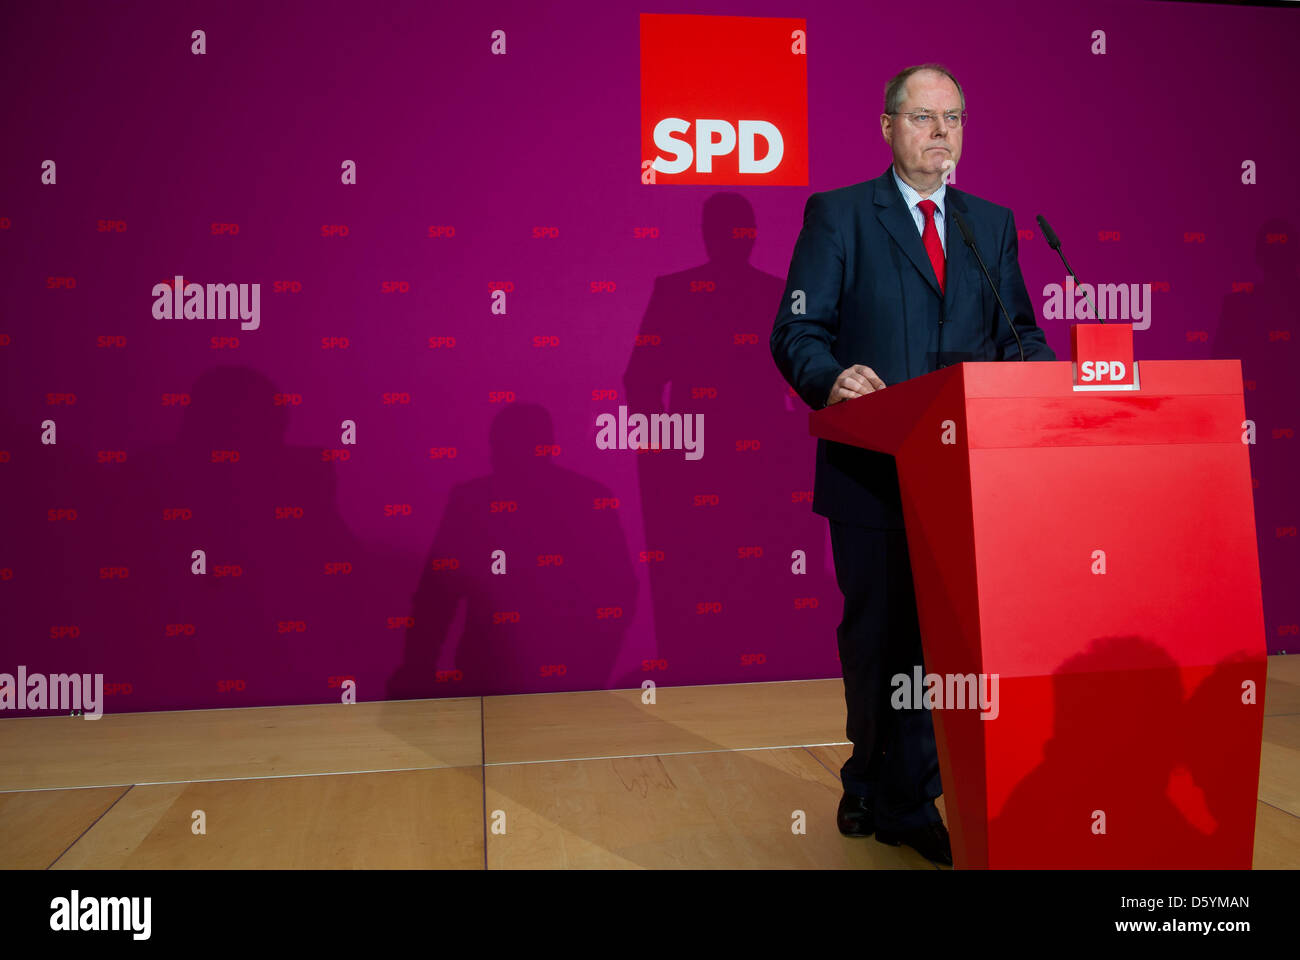 SPD chancellor candidate Steinbrueck holds a press conference on his earnings from speaking engagements in Berlin, Germany, 30 October 2012. Reports state that Steinbrueck has earned 1.25 million euros on the side between 2009 and 2010. Photo: TIM BRAKEMEIER Stock Photo